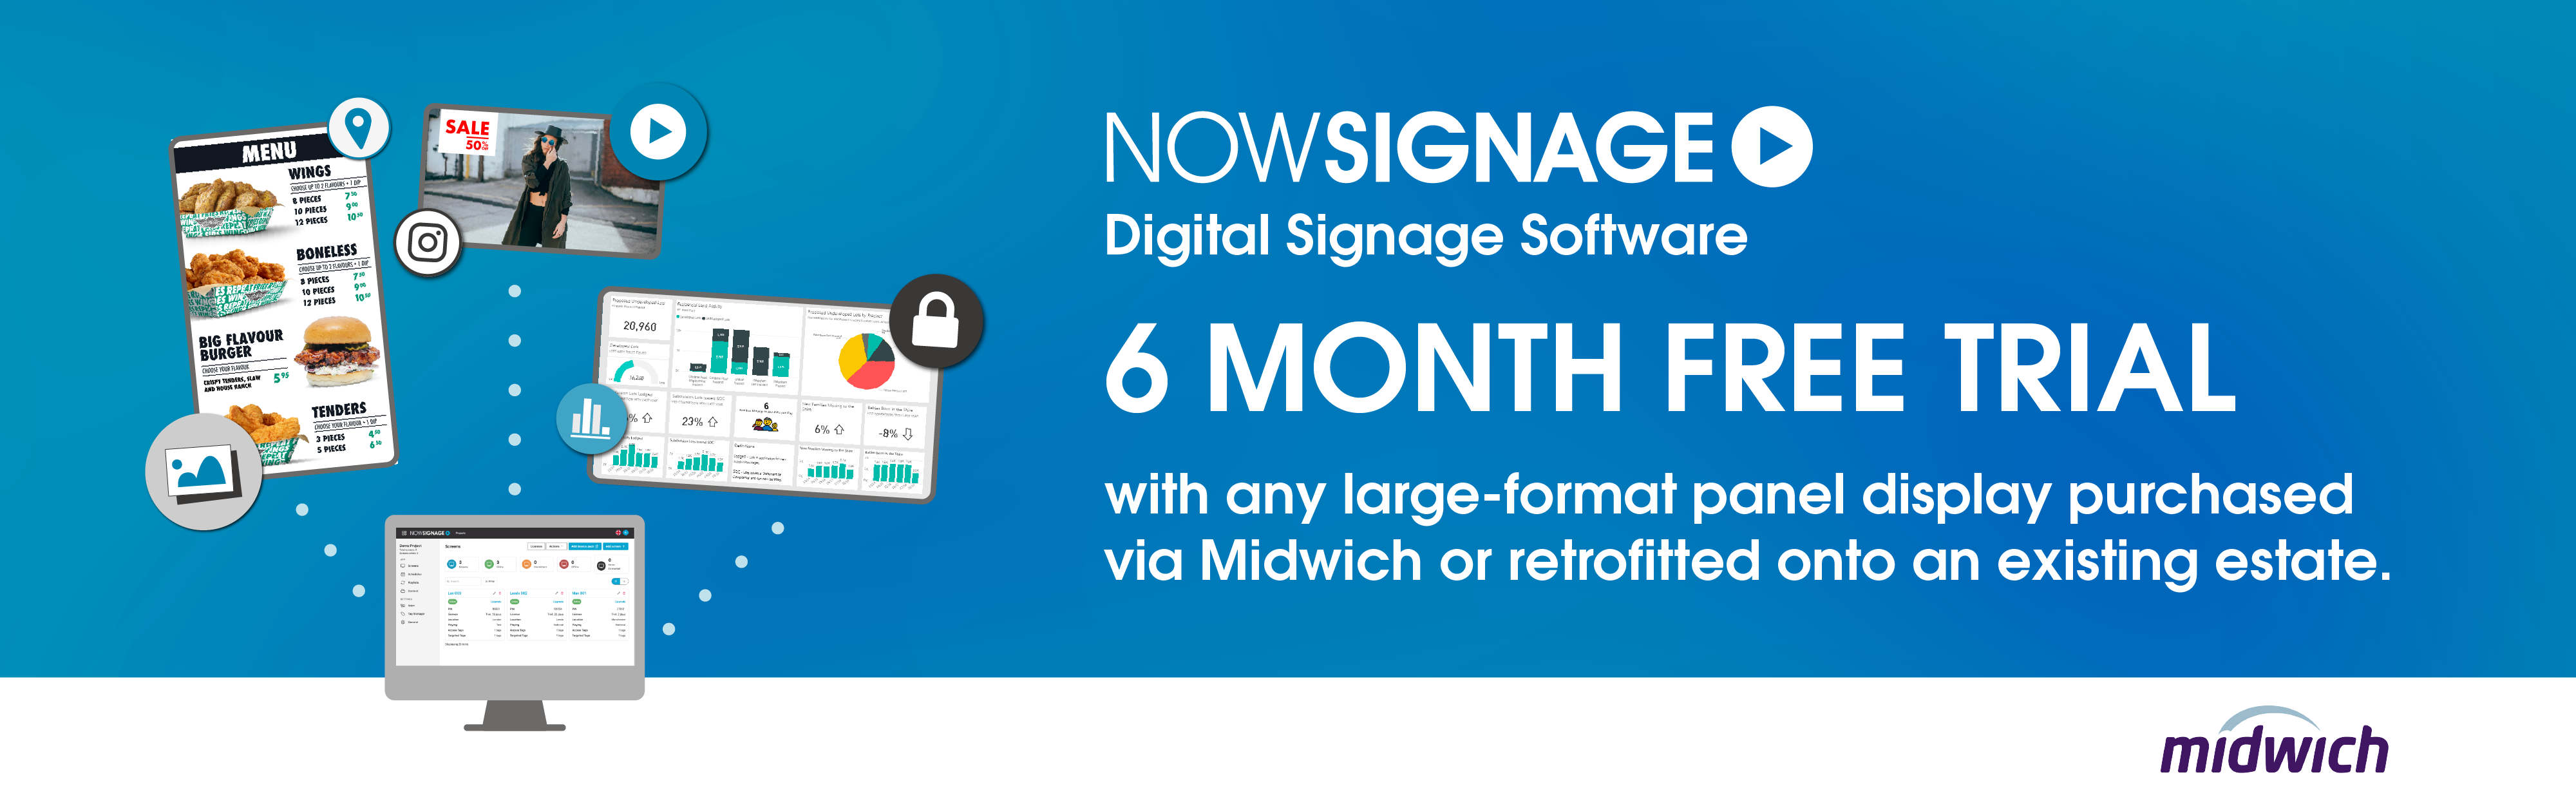 Midwich 6 Month Promo